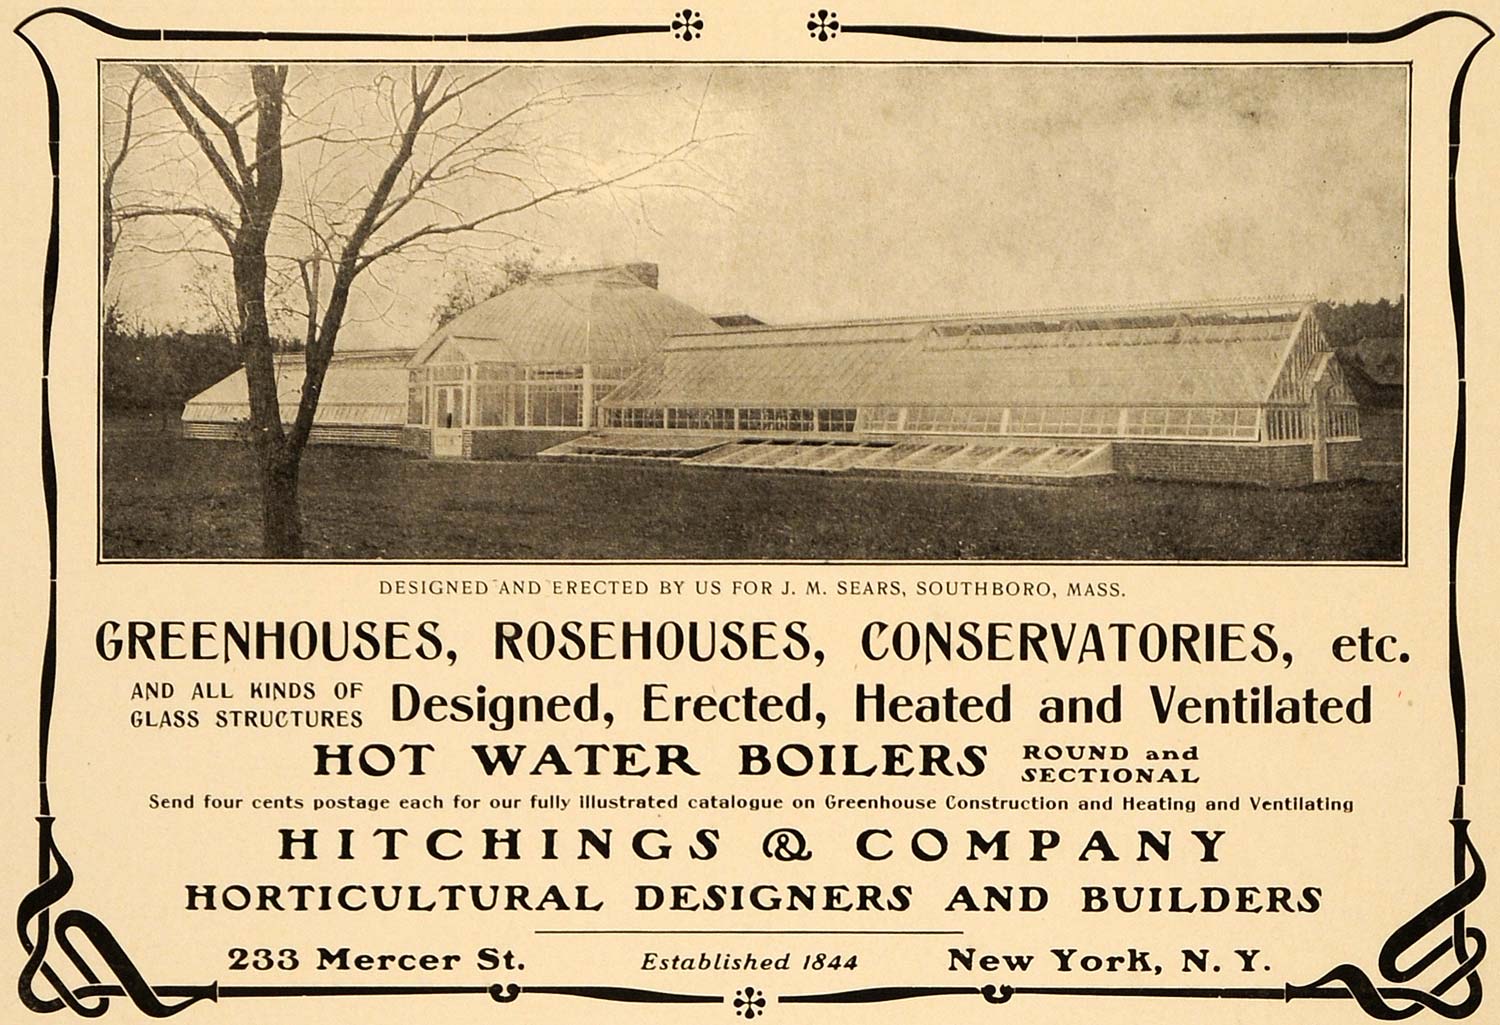 1904 Ad Hitchings Horticulture Architecture J. M. Sears Southboro MA ARC3